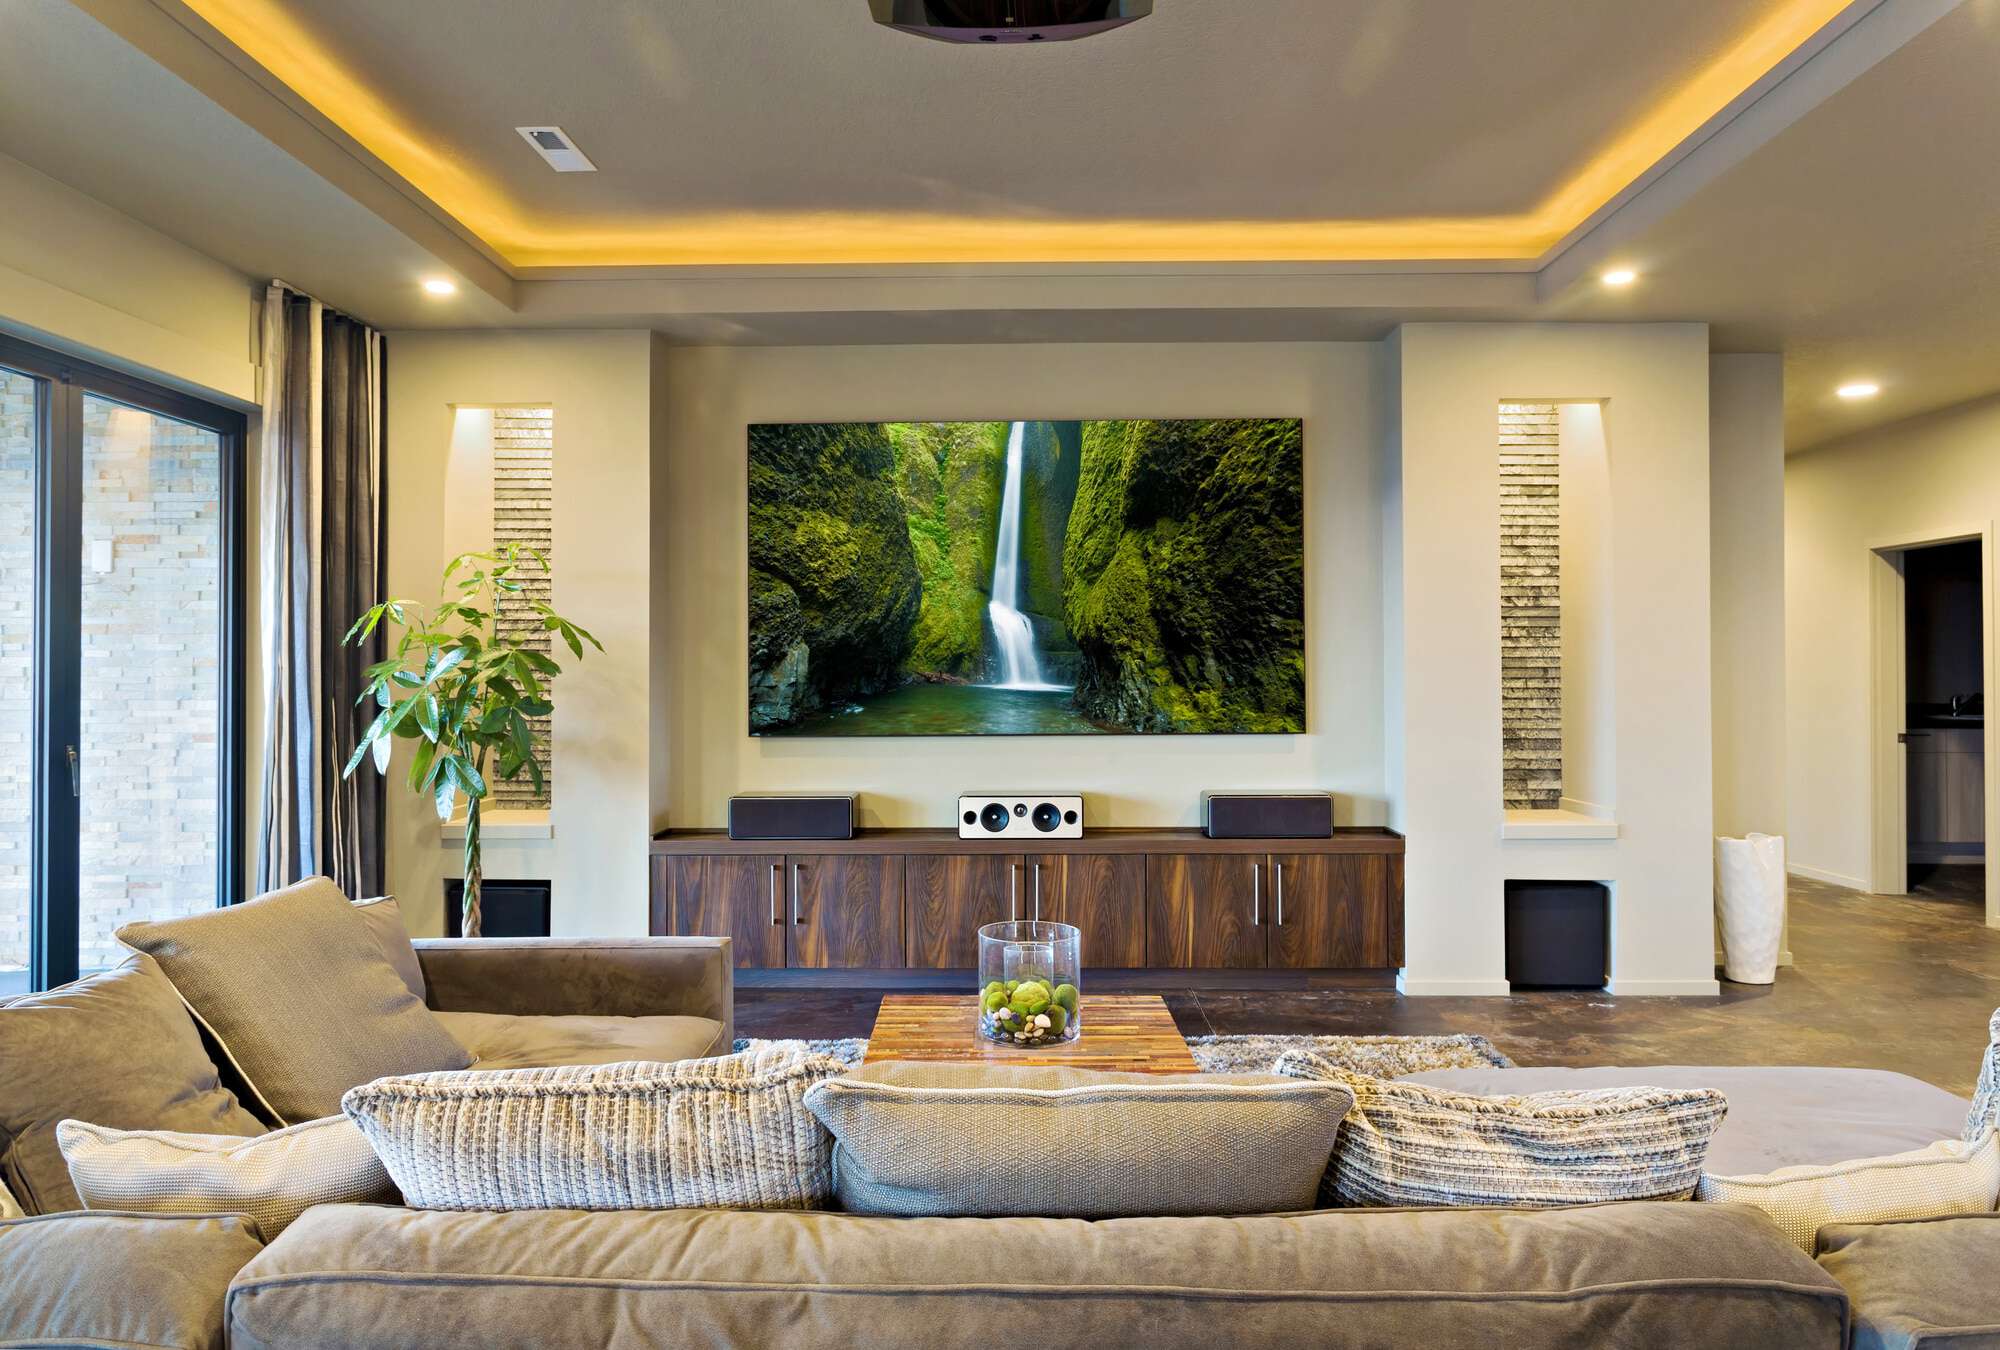 motorized blinds for a home theater